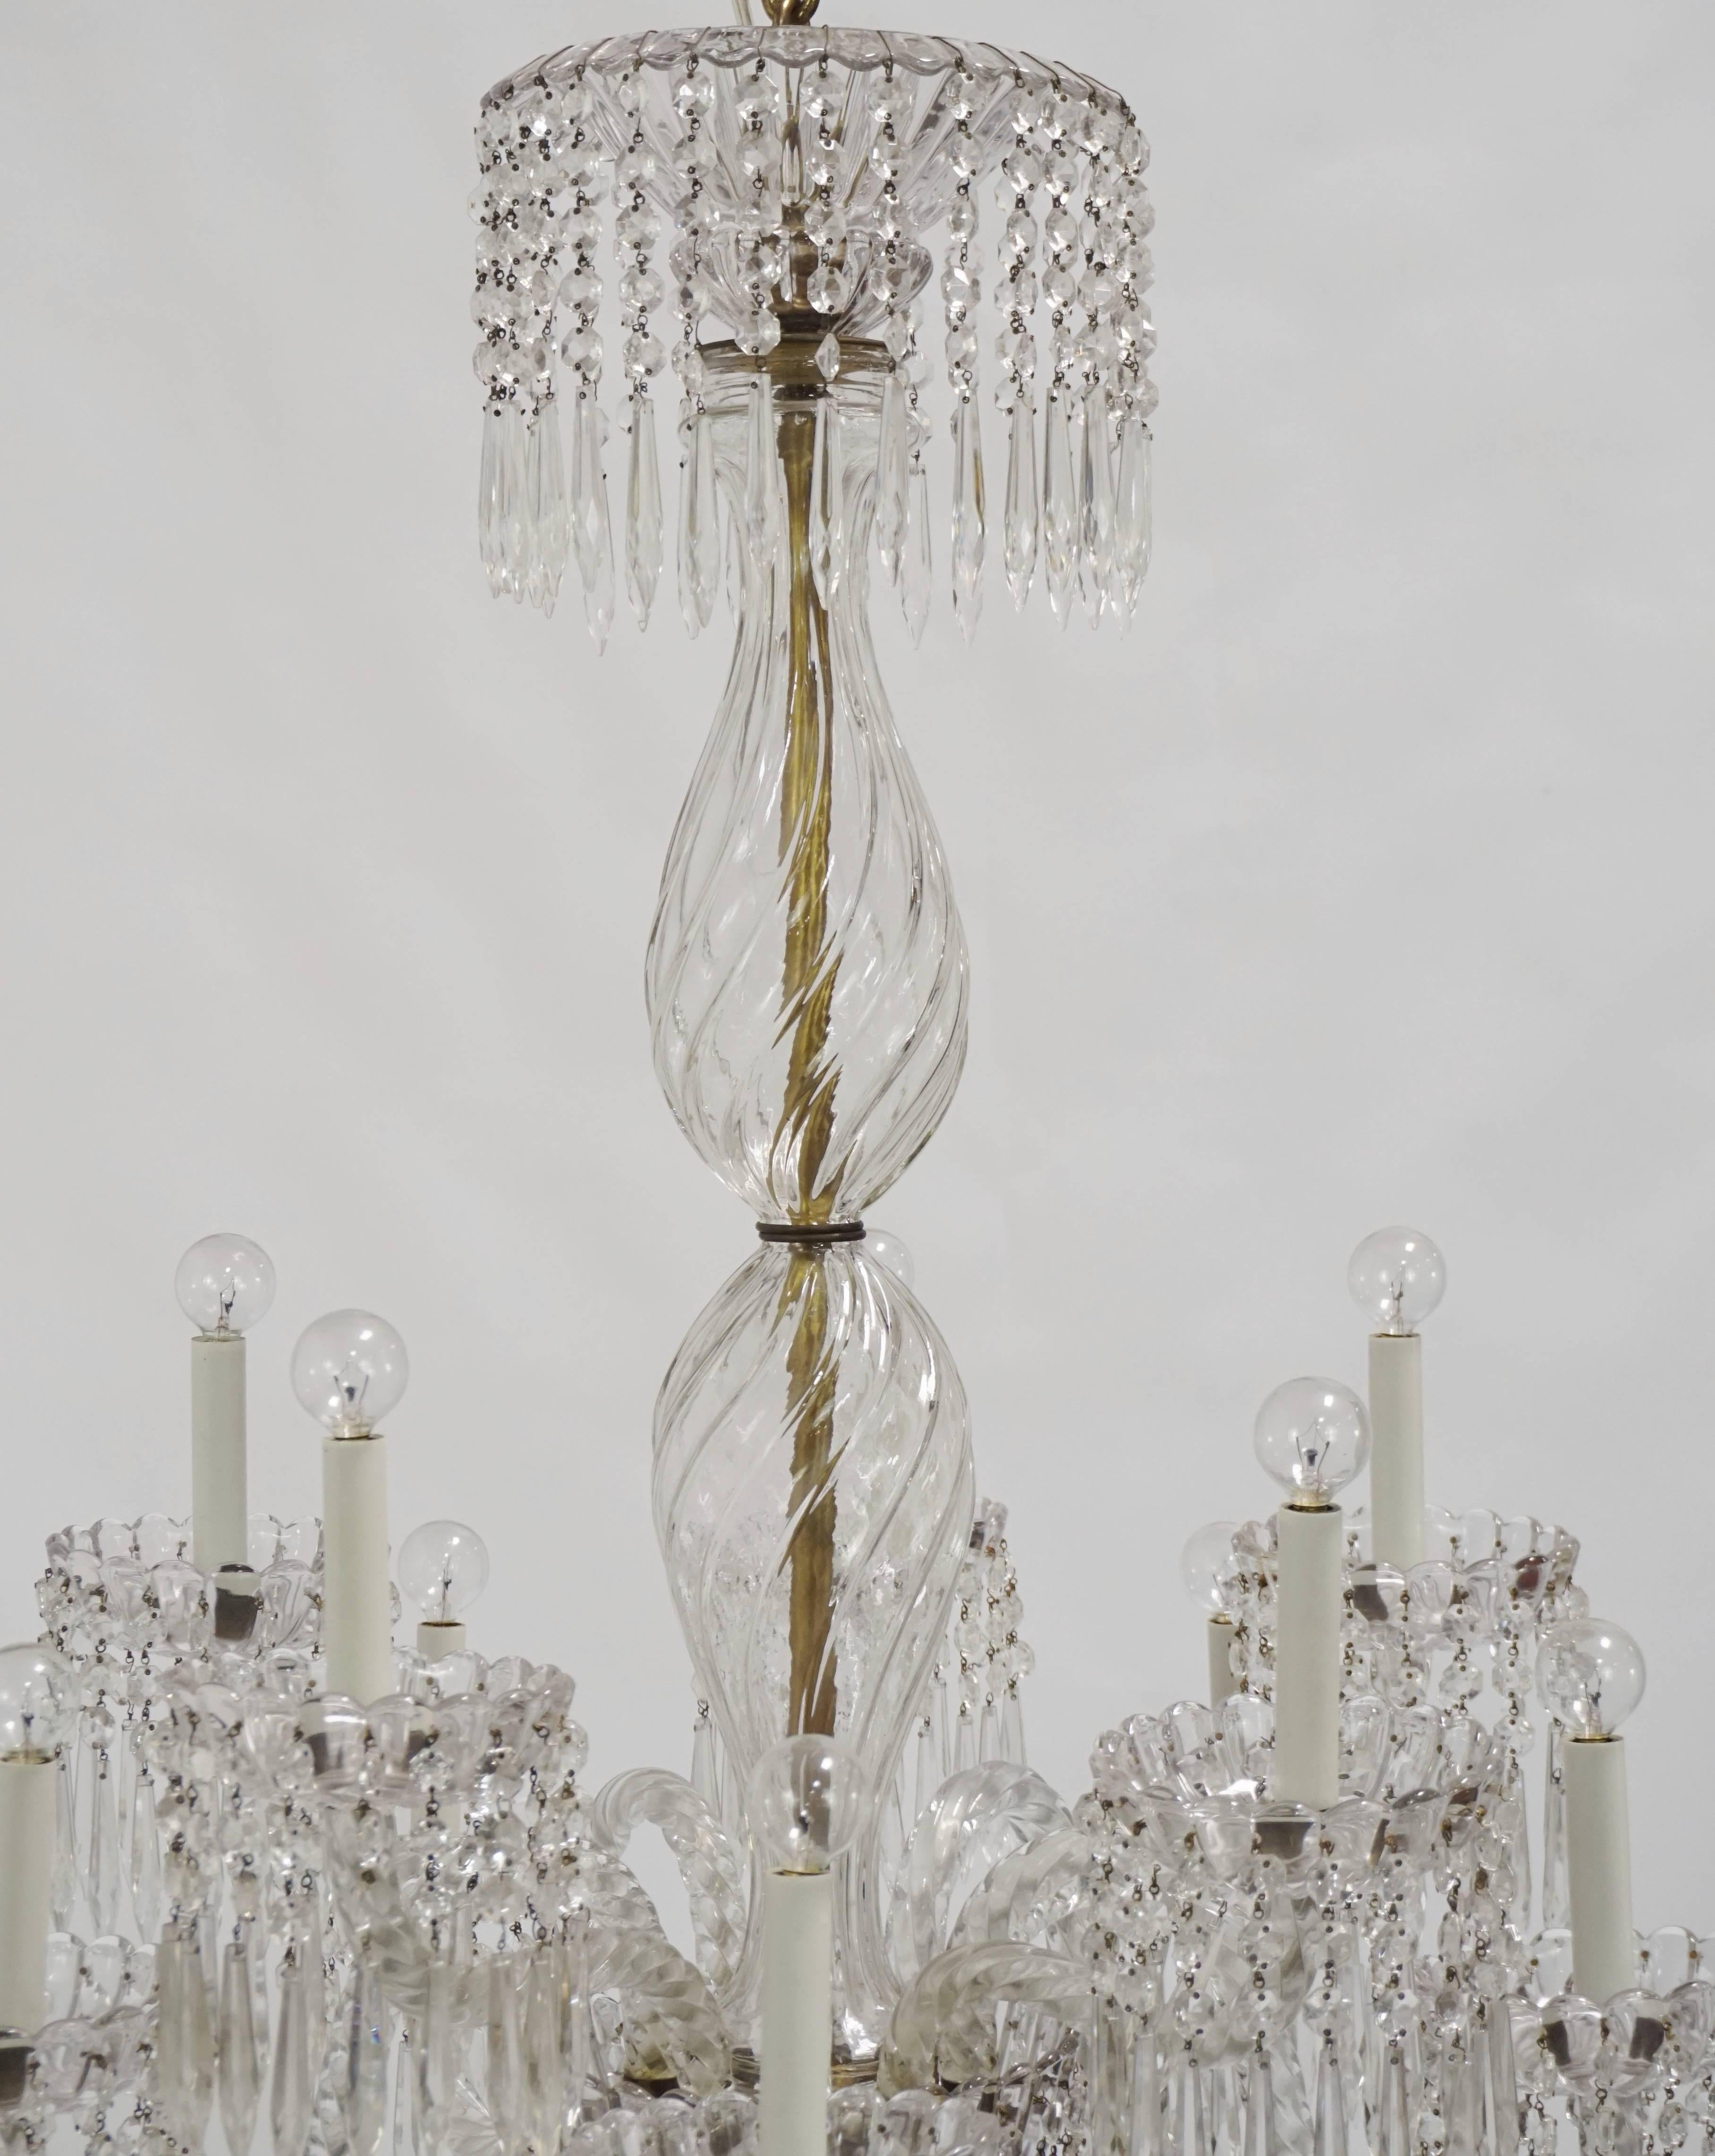 Antique Baccarat Undulating 10-Armed Crystal Waterfalls Chandelier 2